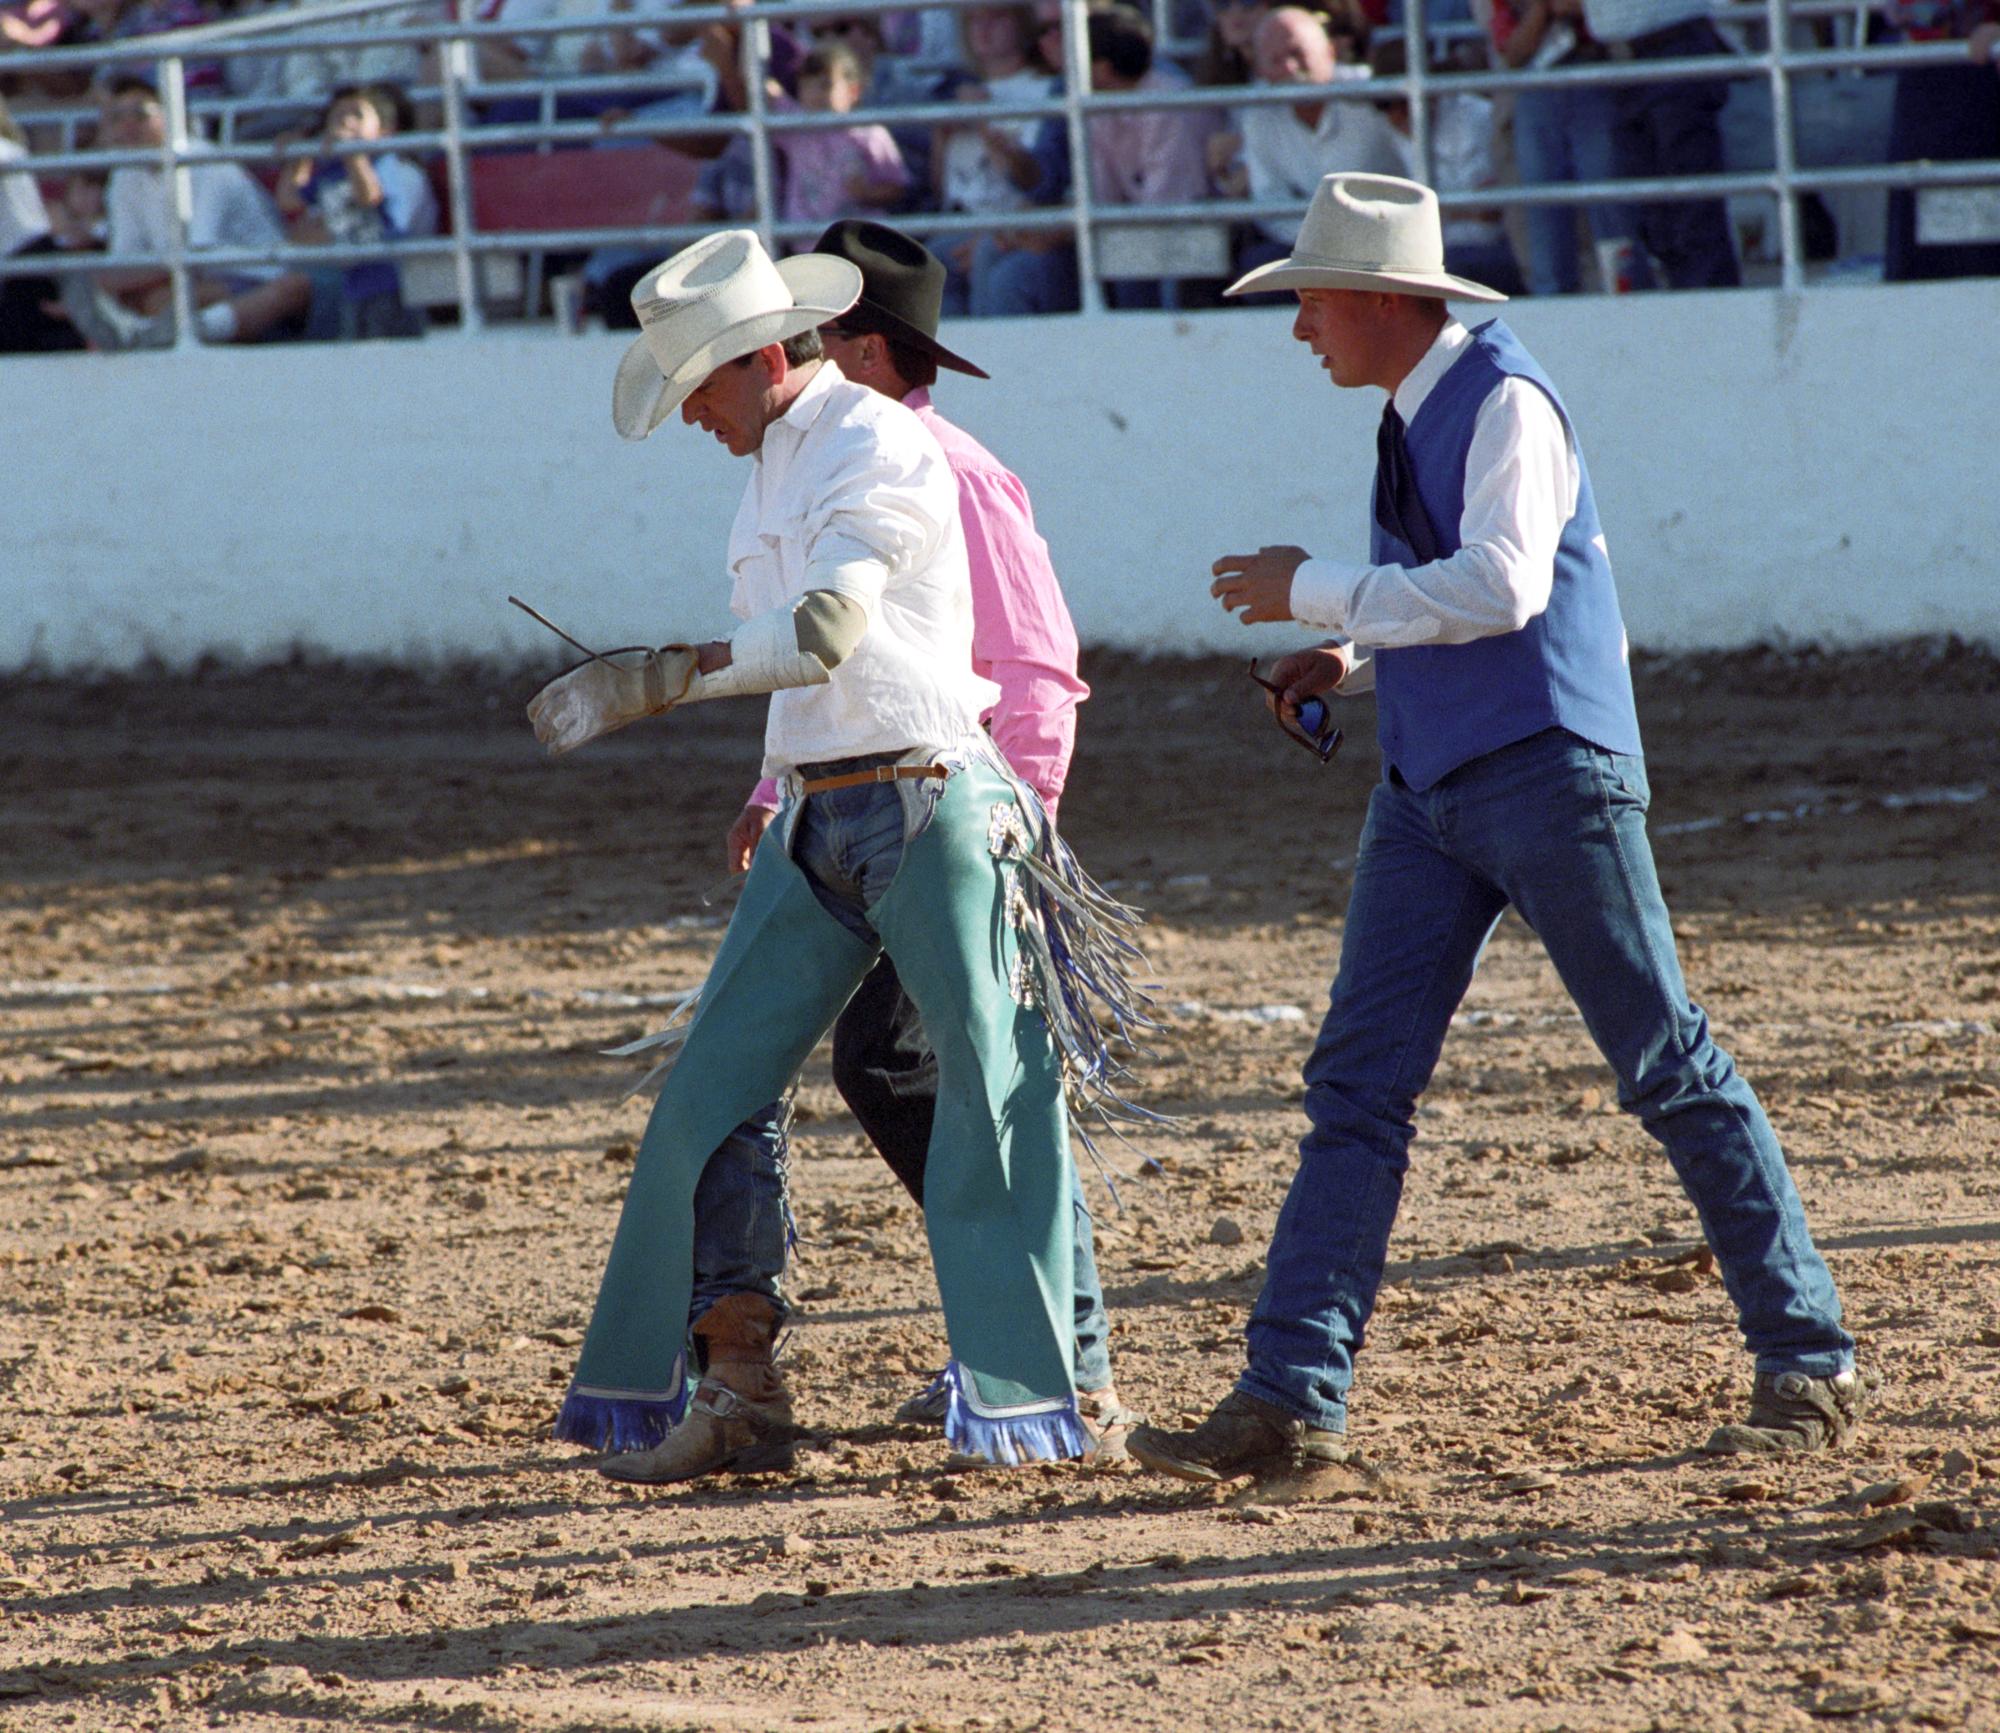 Imperial Valley Rodeo (1992) - Tough Hombre #8